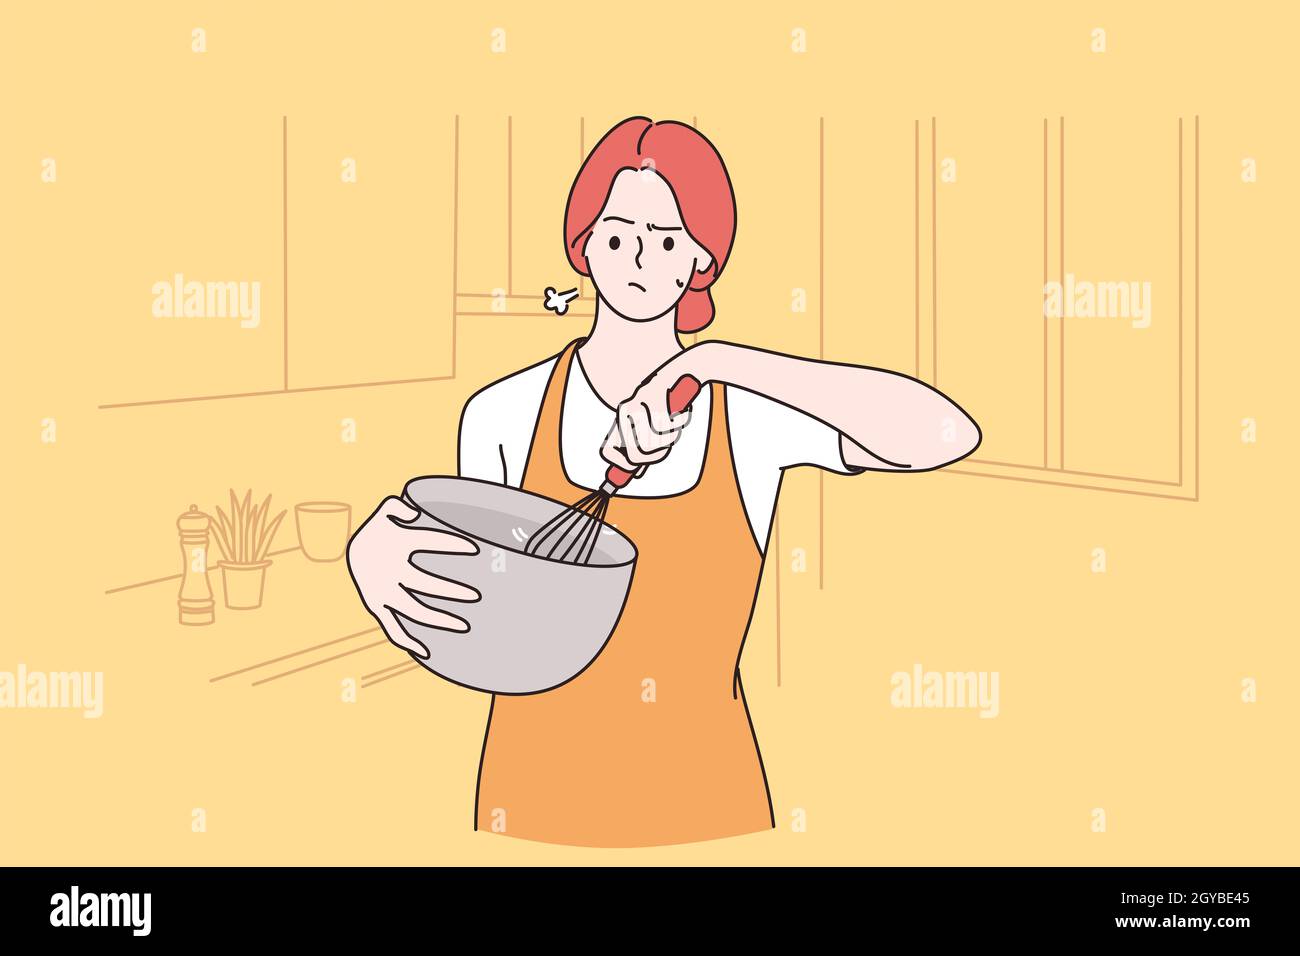 Tiredness of cooking at home concept. Sad frustrated irritated pretty girl cartoon character in apron standing cooking and feeling tired of housework Stock Photo